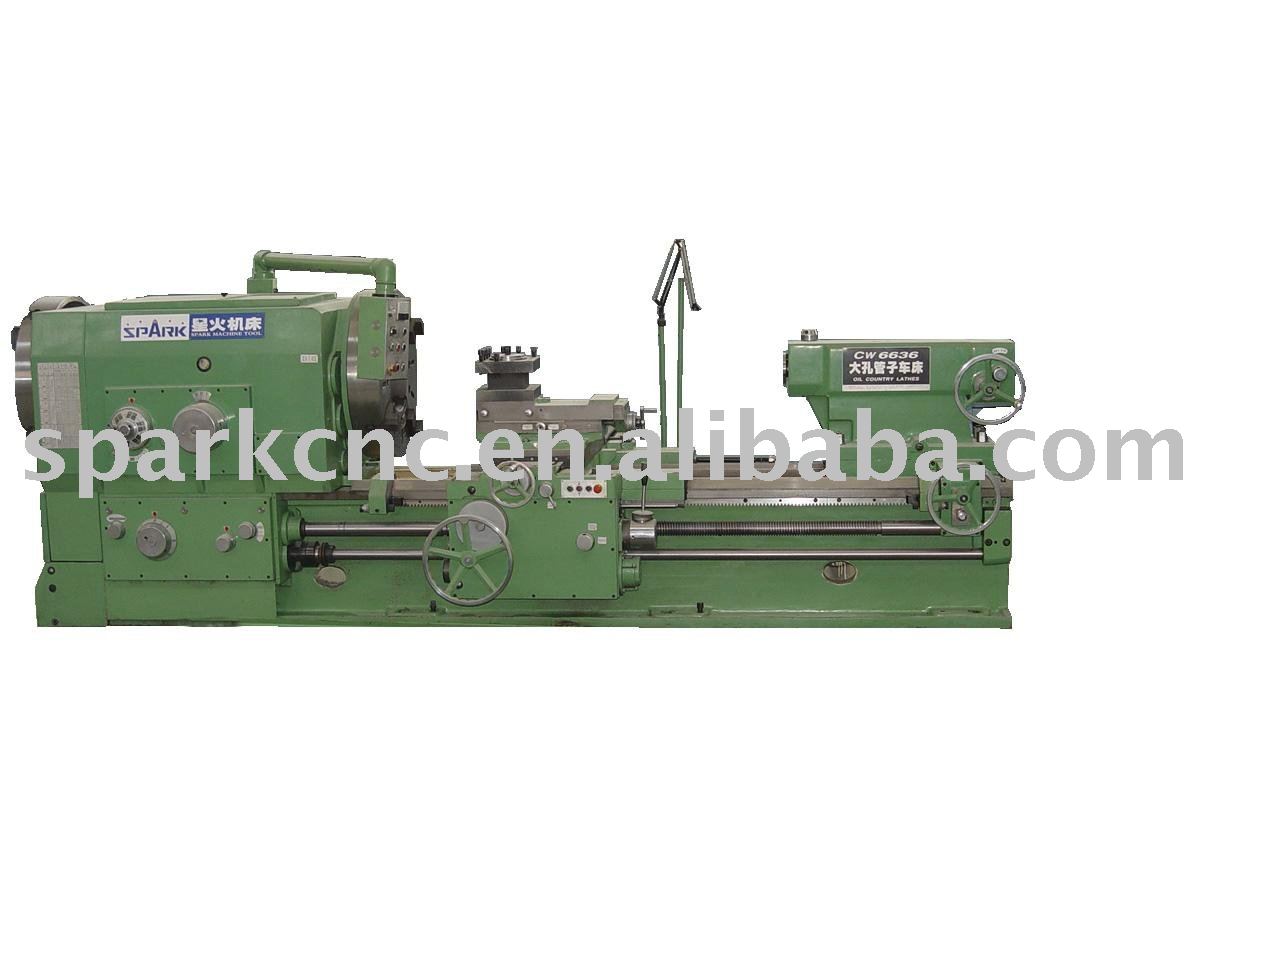 Cw6636-Cw6663 Specification Of Oil Country Lathe